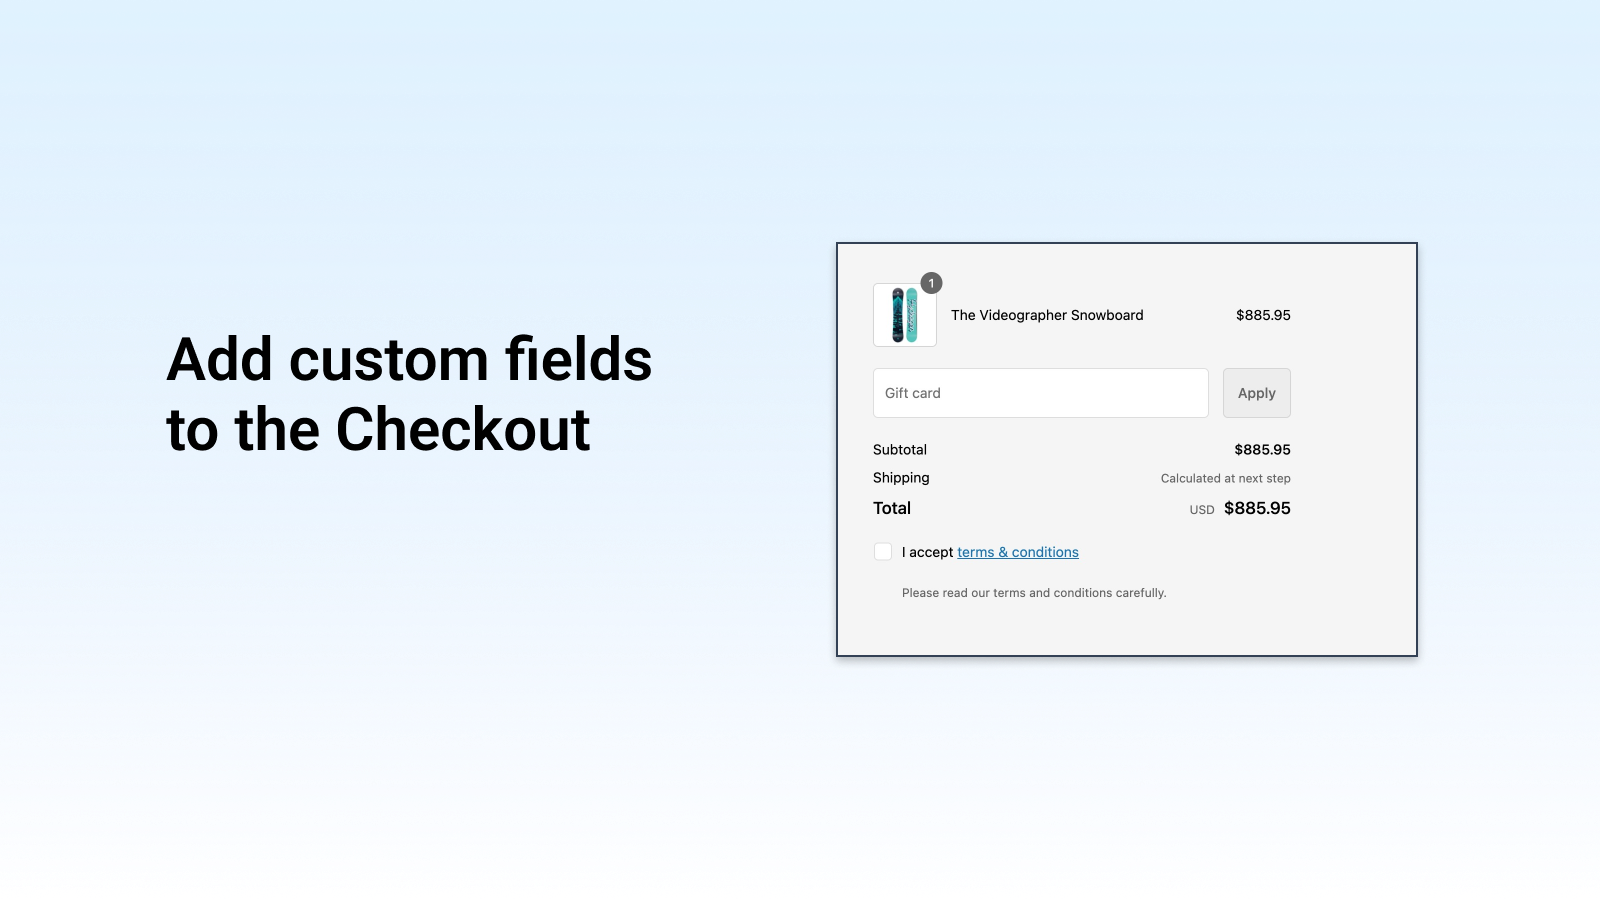 Add custom fields to the Checkout